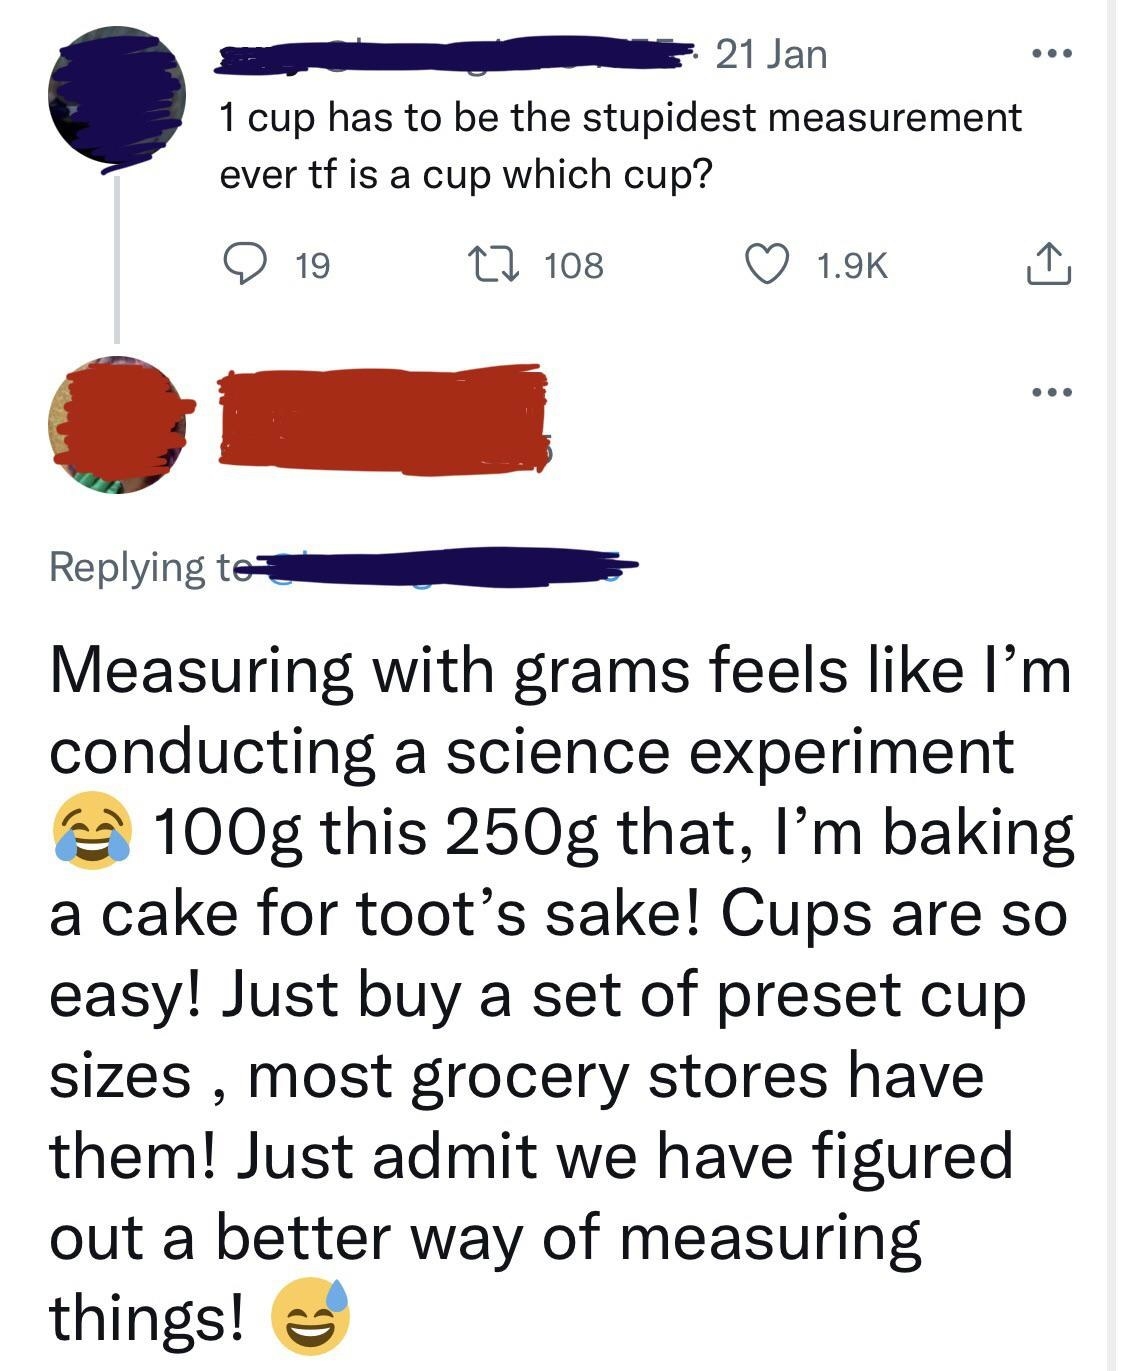 american complaining about measuring stuff in grams